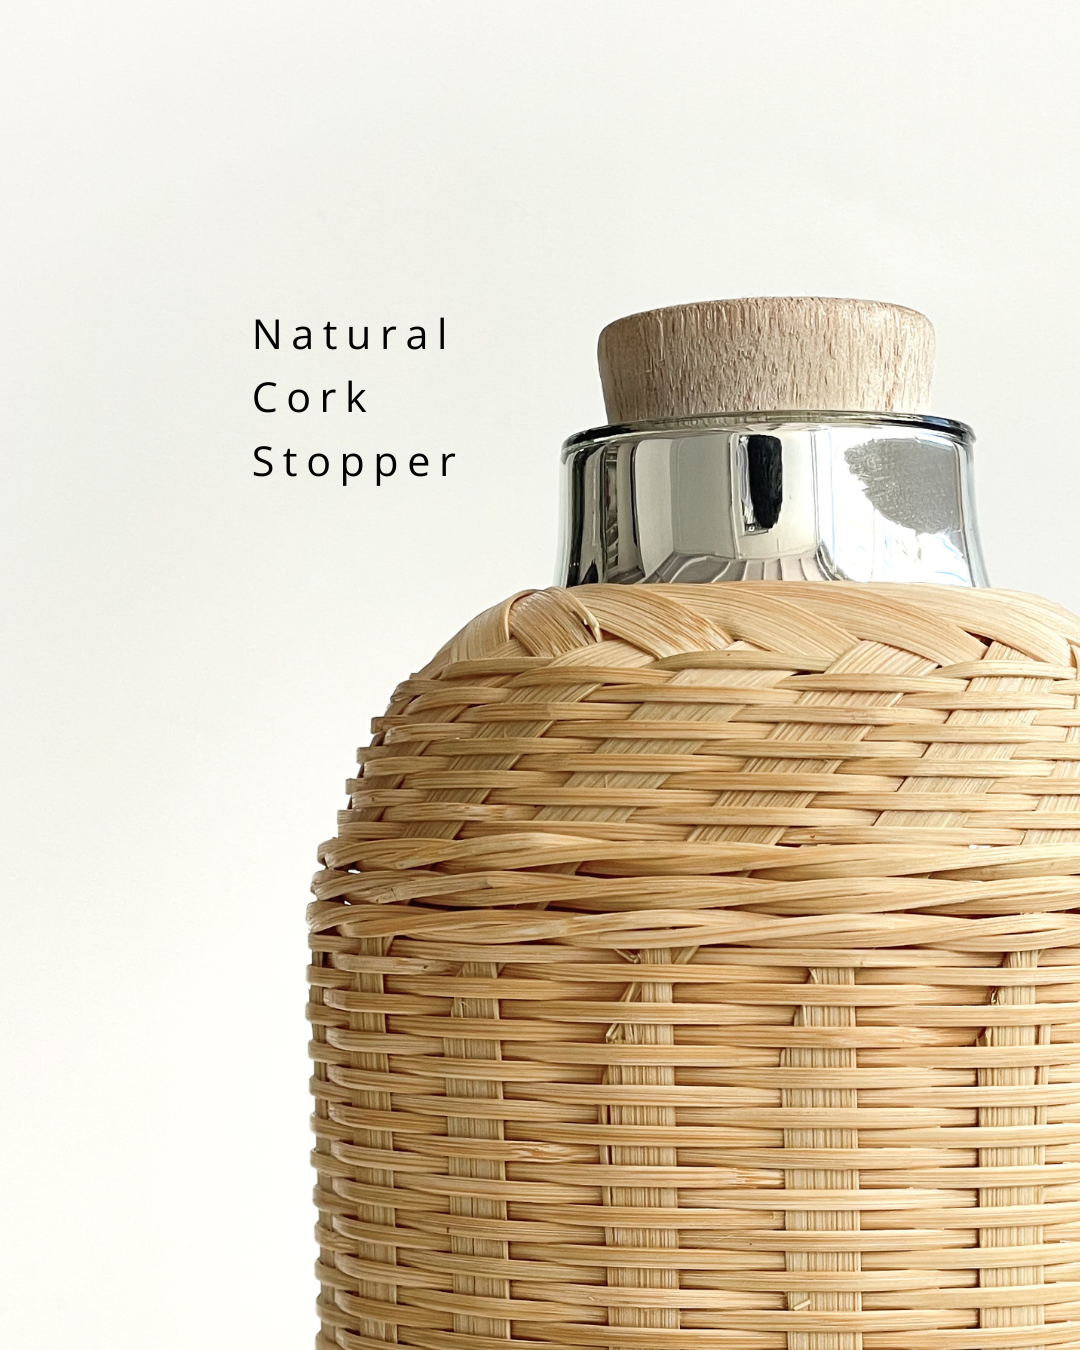 Bamboo flask with Natural Cork Stopper